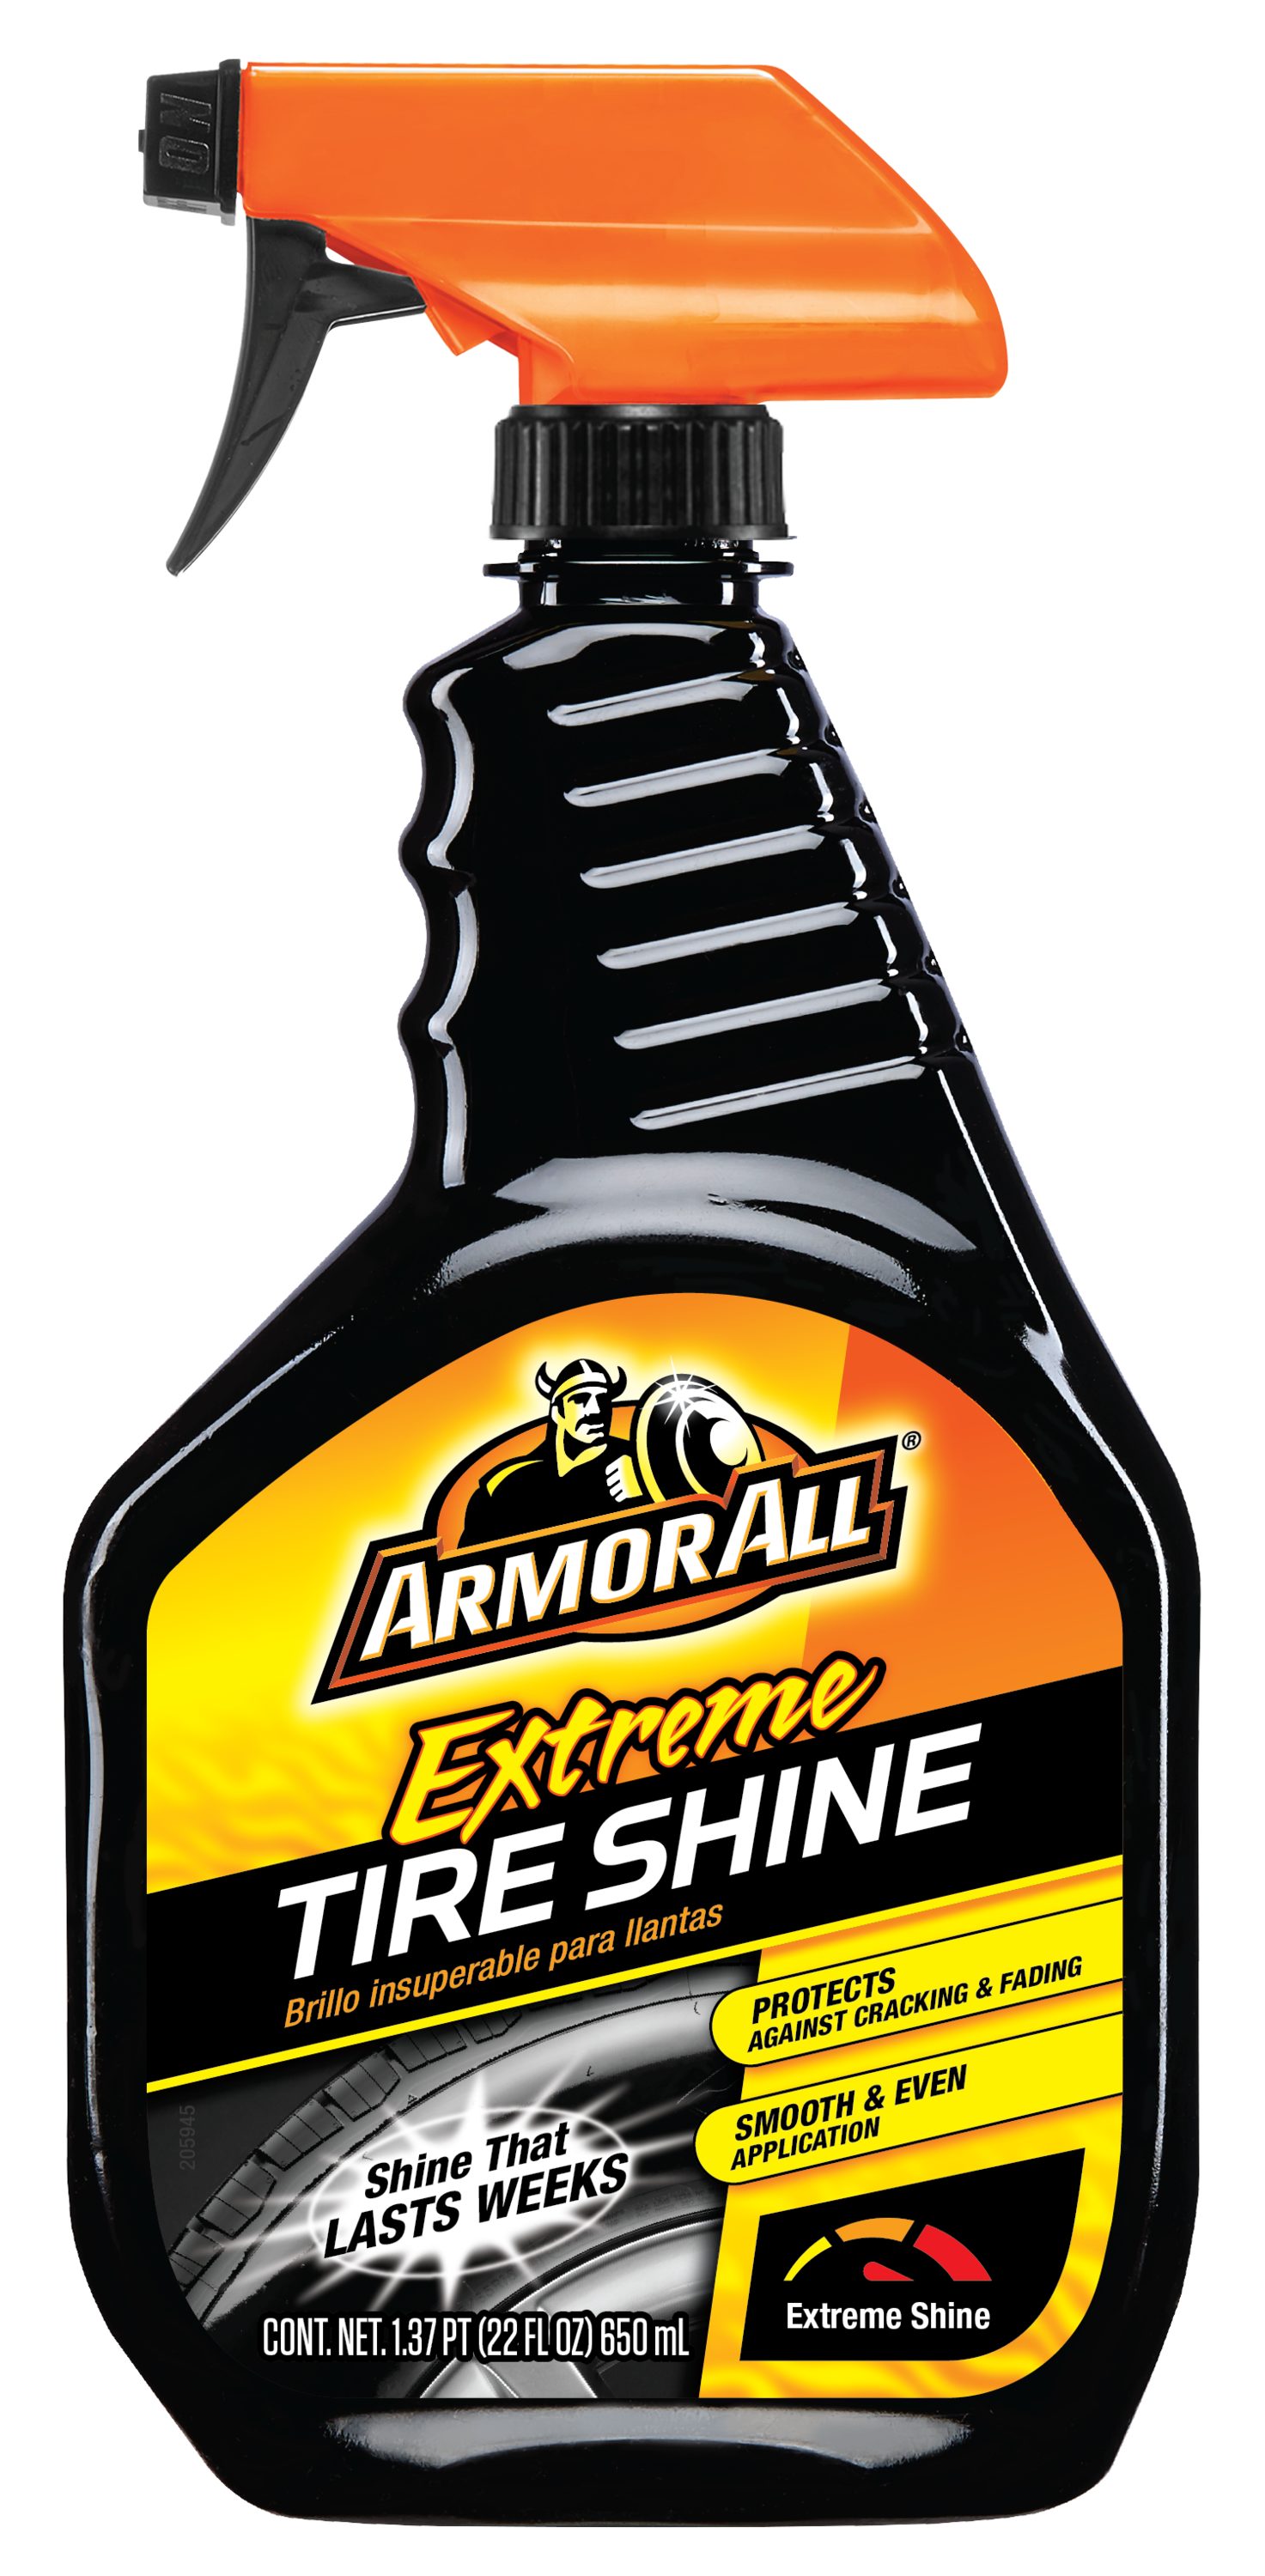  Armor All Original Protectant Spray, Car Interior Cleaner with  UV Protection to Fight Cracking & Fading, 8 Oz (1 Pack) : Automotive